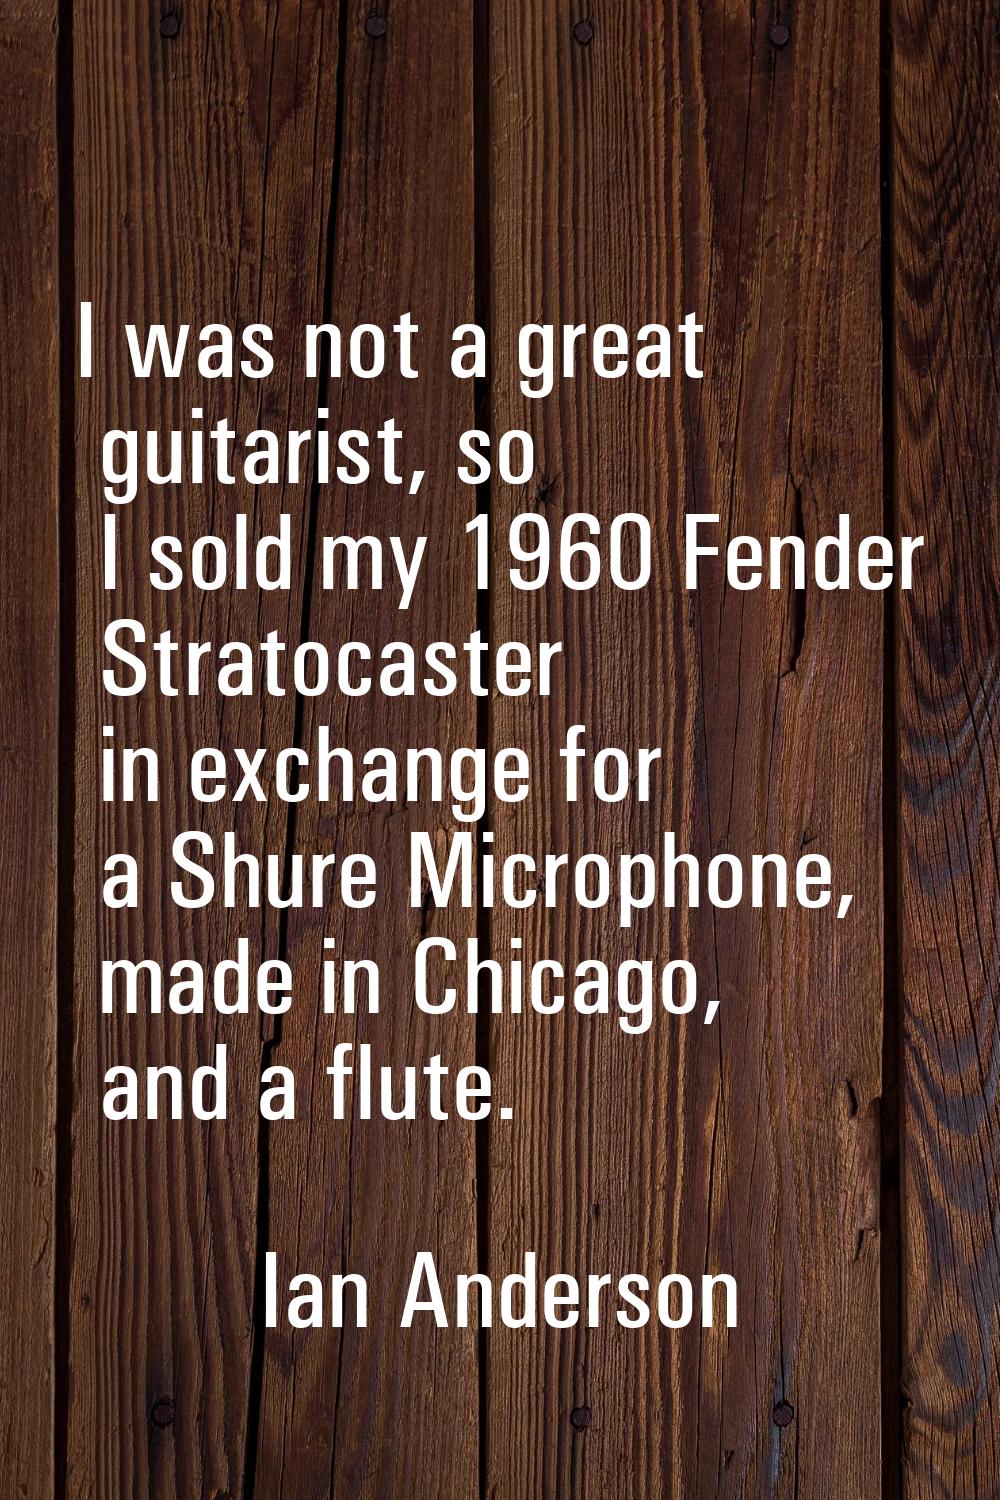 I was not a great guitarist, so I sold my 1960 Fender Stratocaster in exchange for a Shure Micropho